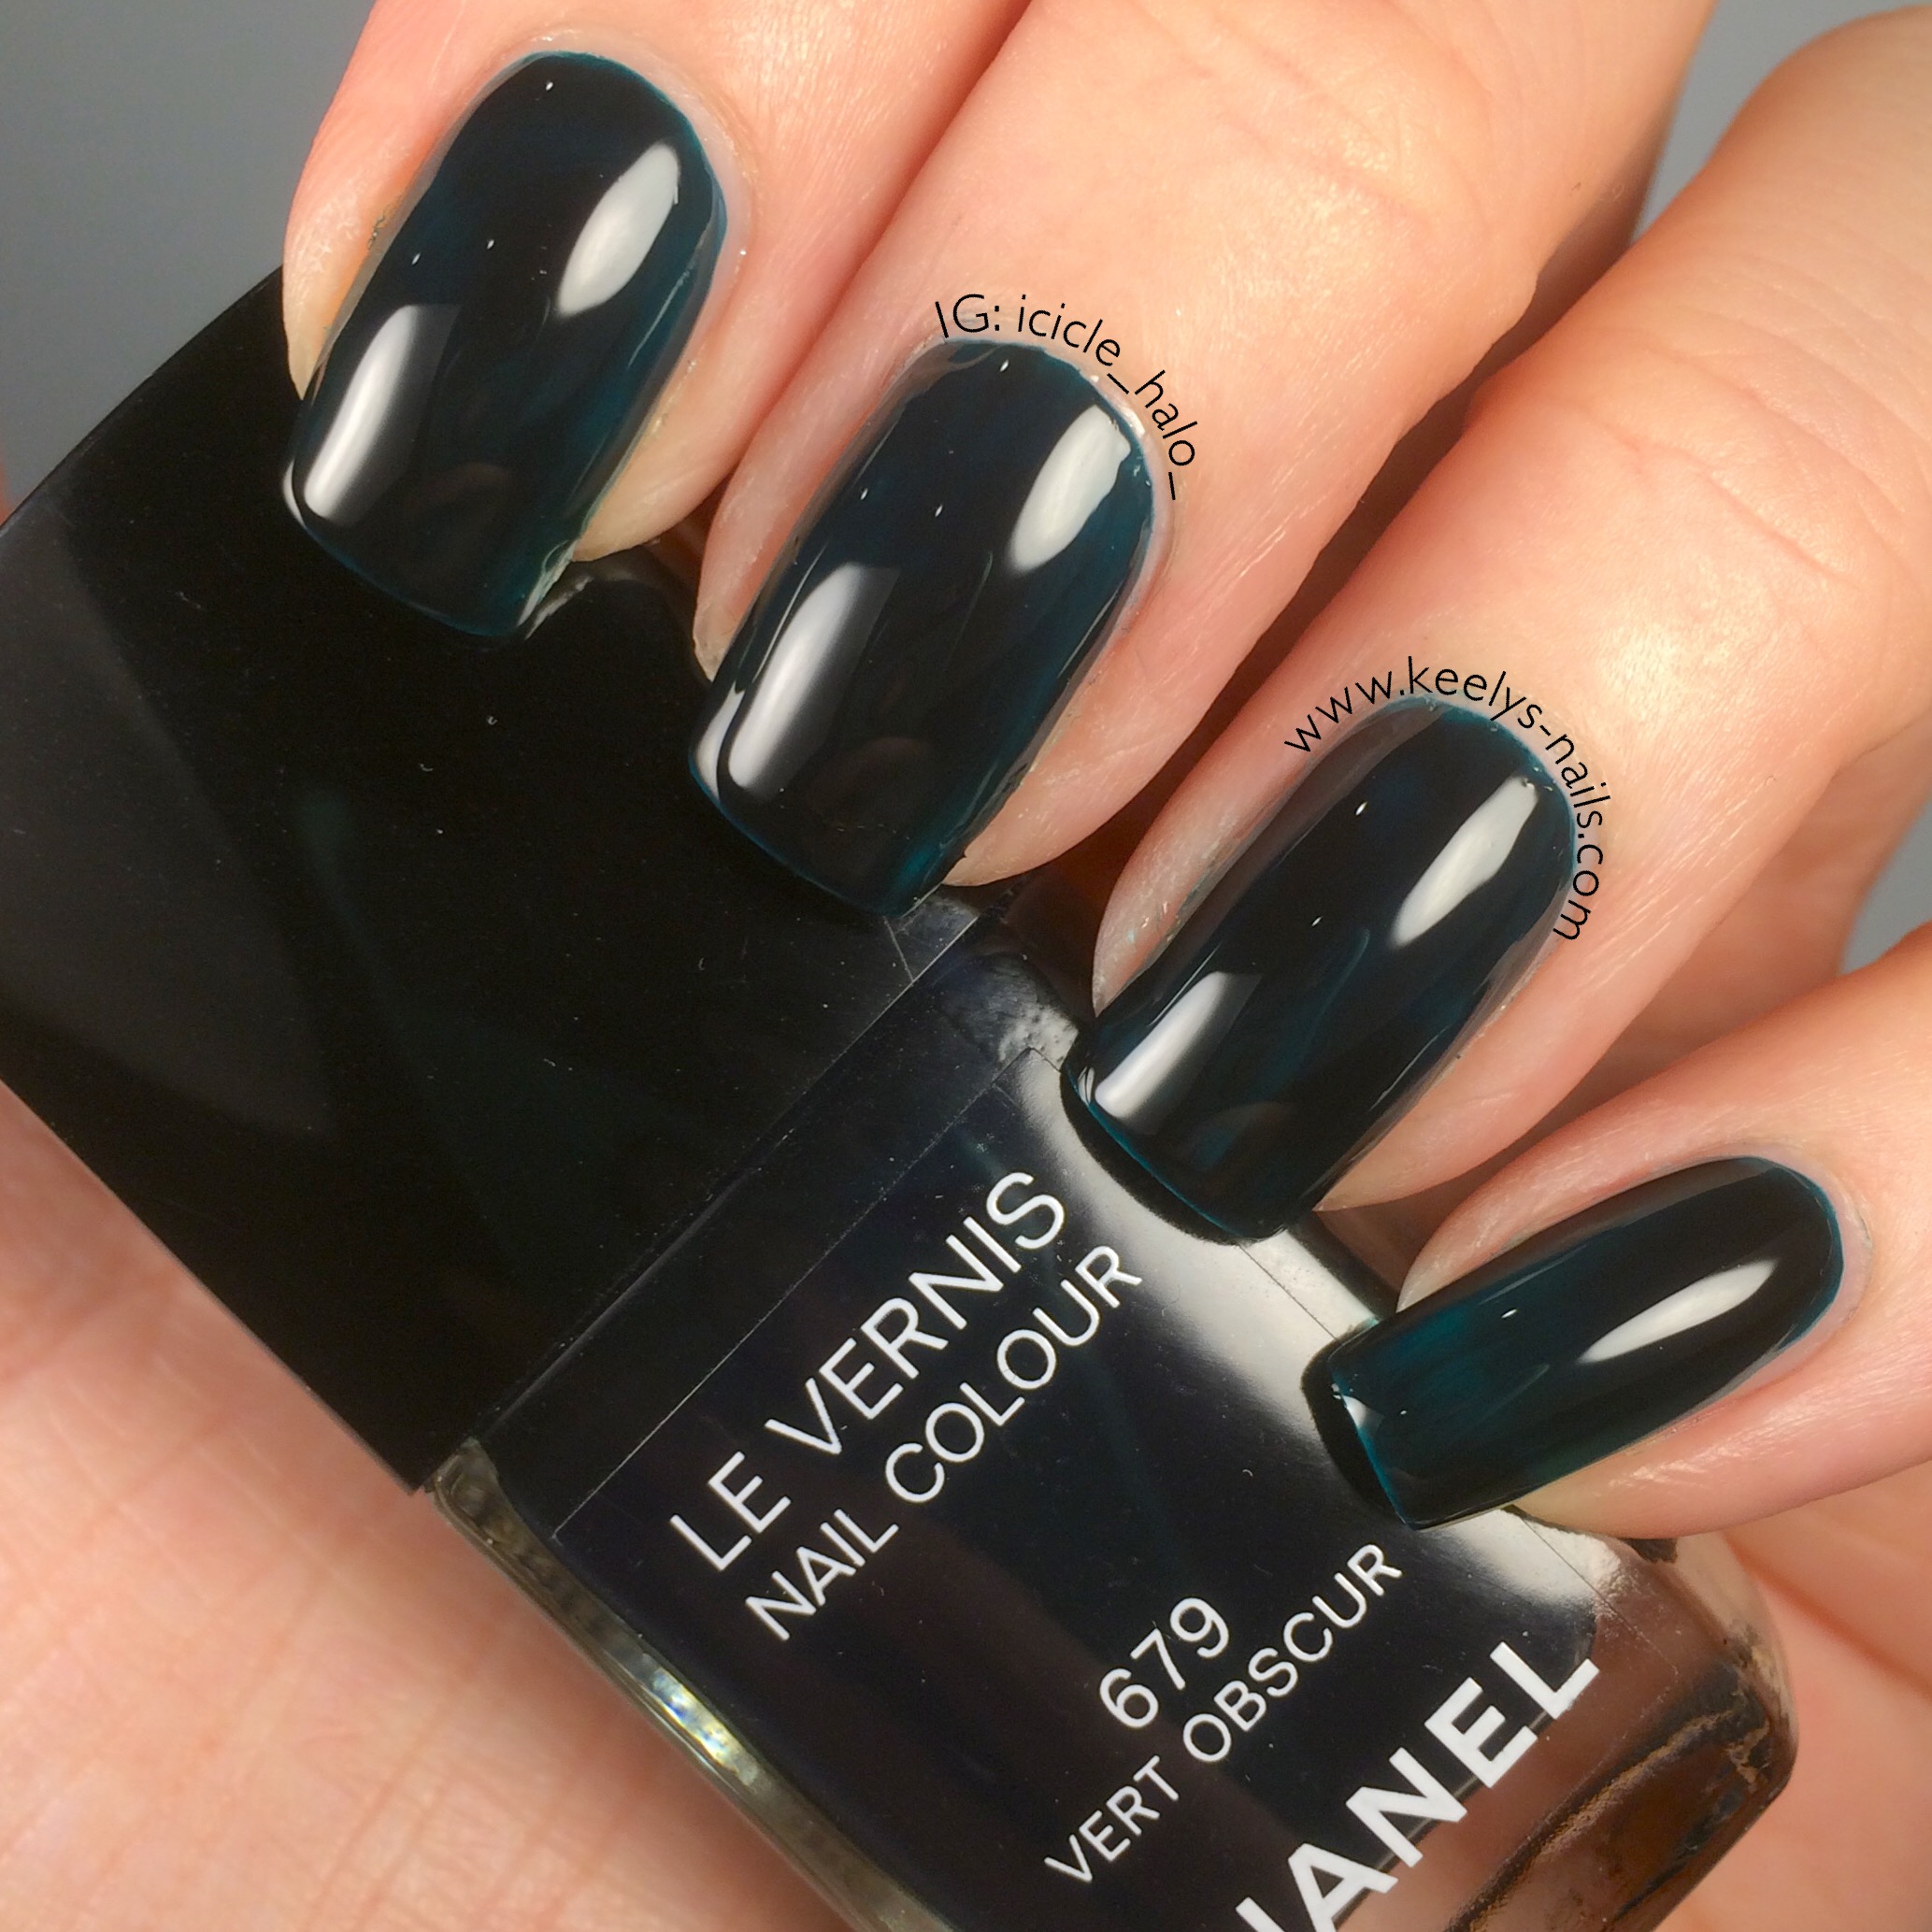 Swatch of Chanel Vert Obscur 679 | Keely's Nails